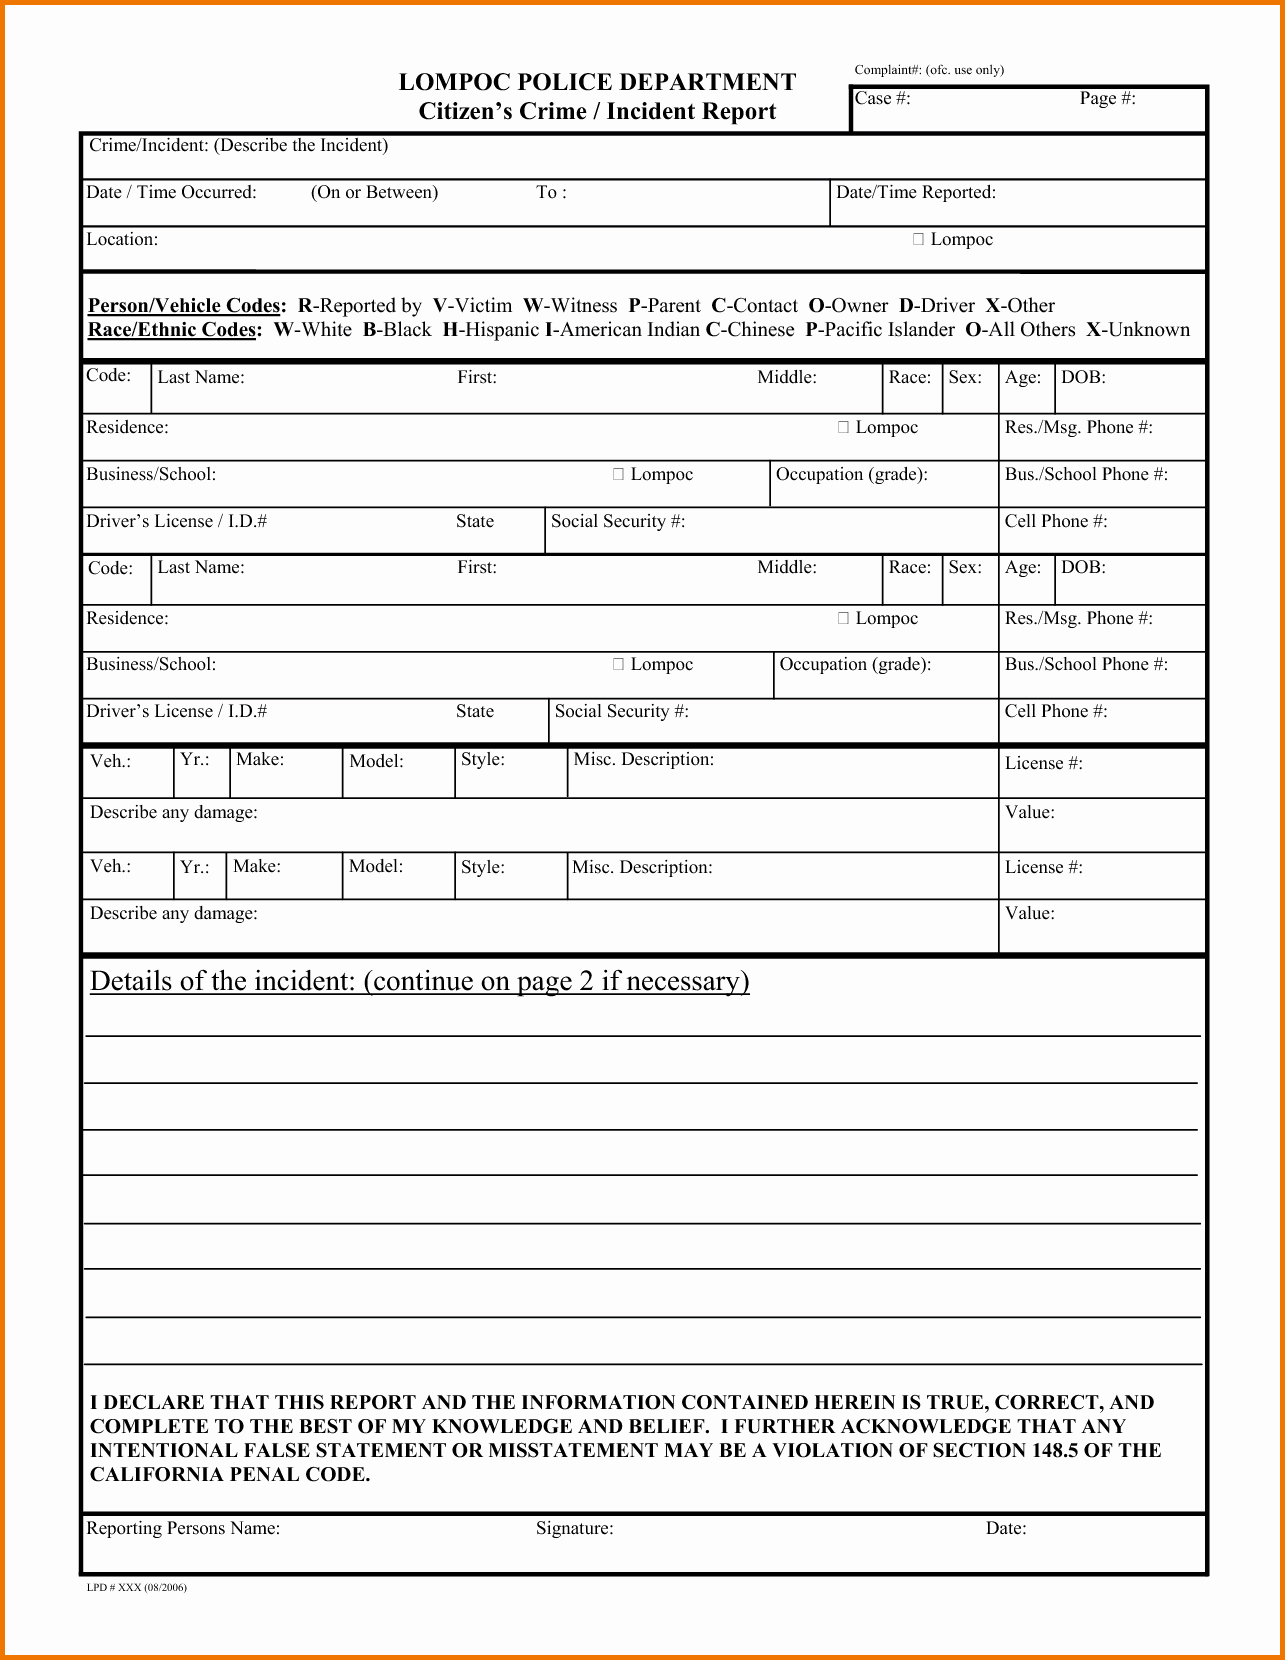 Incident Report Template Microsoft New Incident Report Template Microsoft Portablegasgrillweber